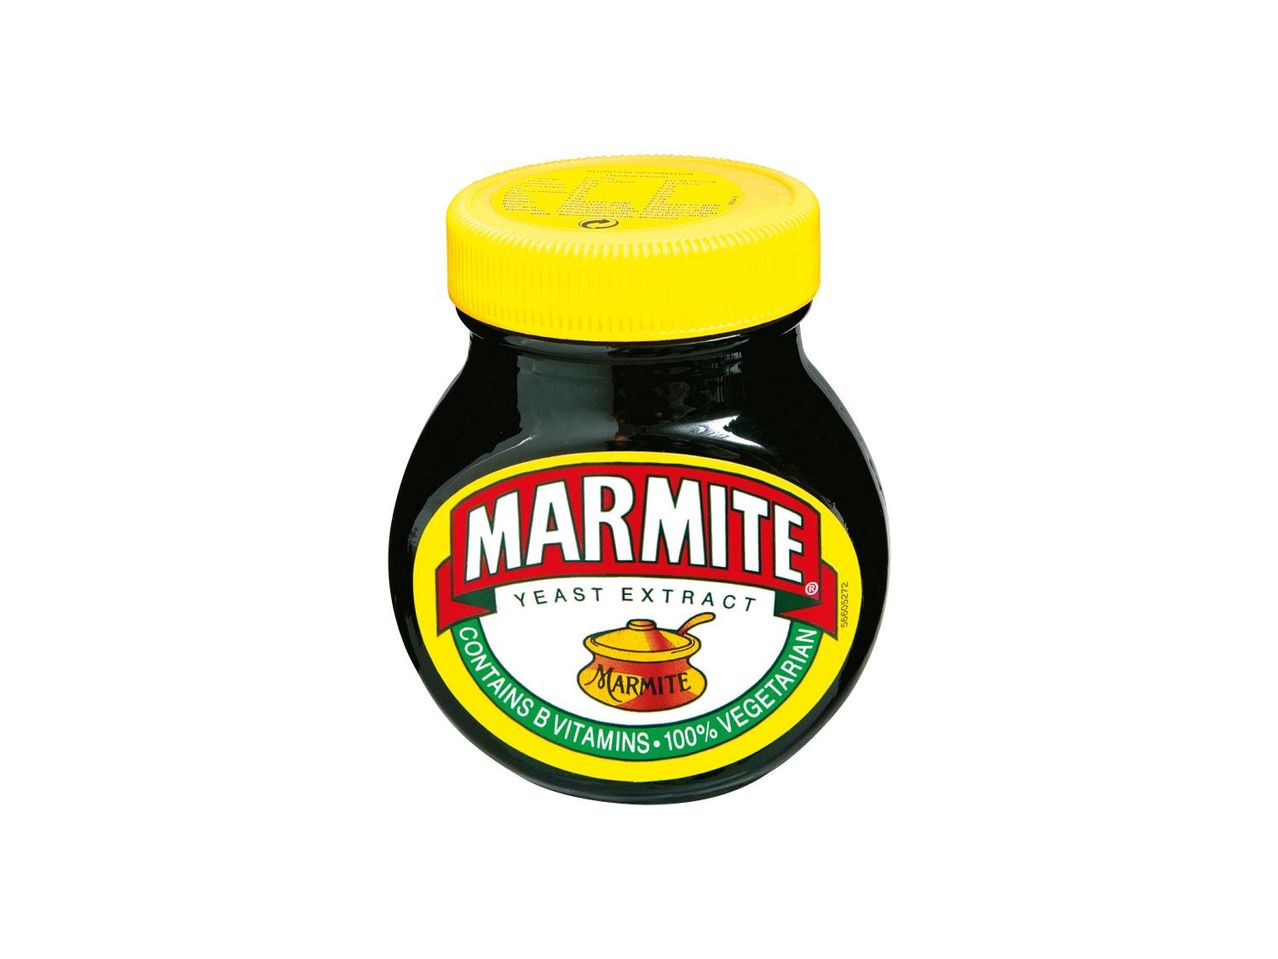 Go to full screen view: Marmite - Image 1